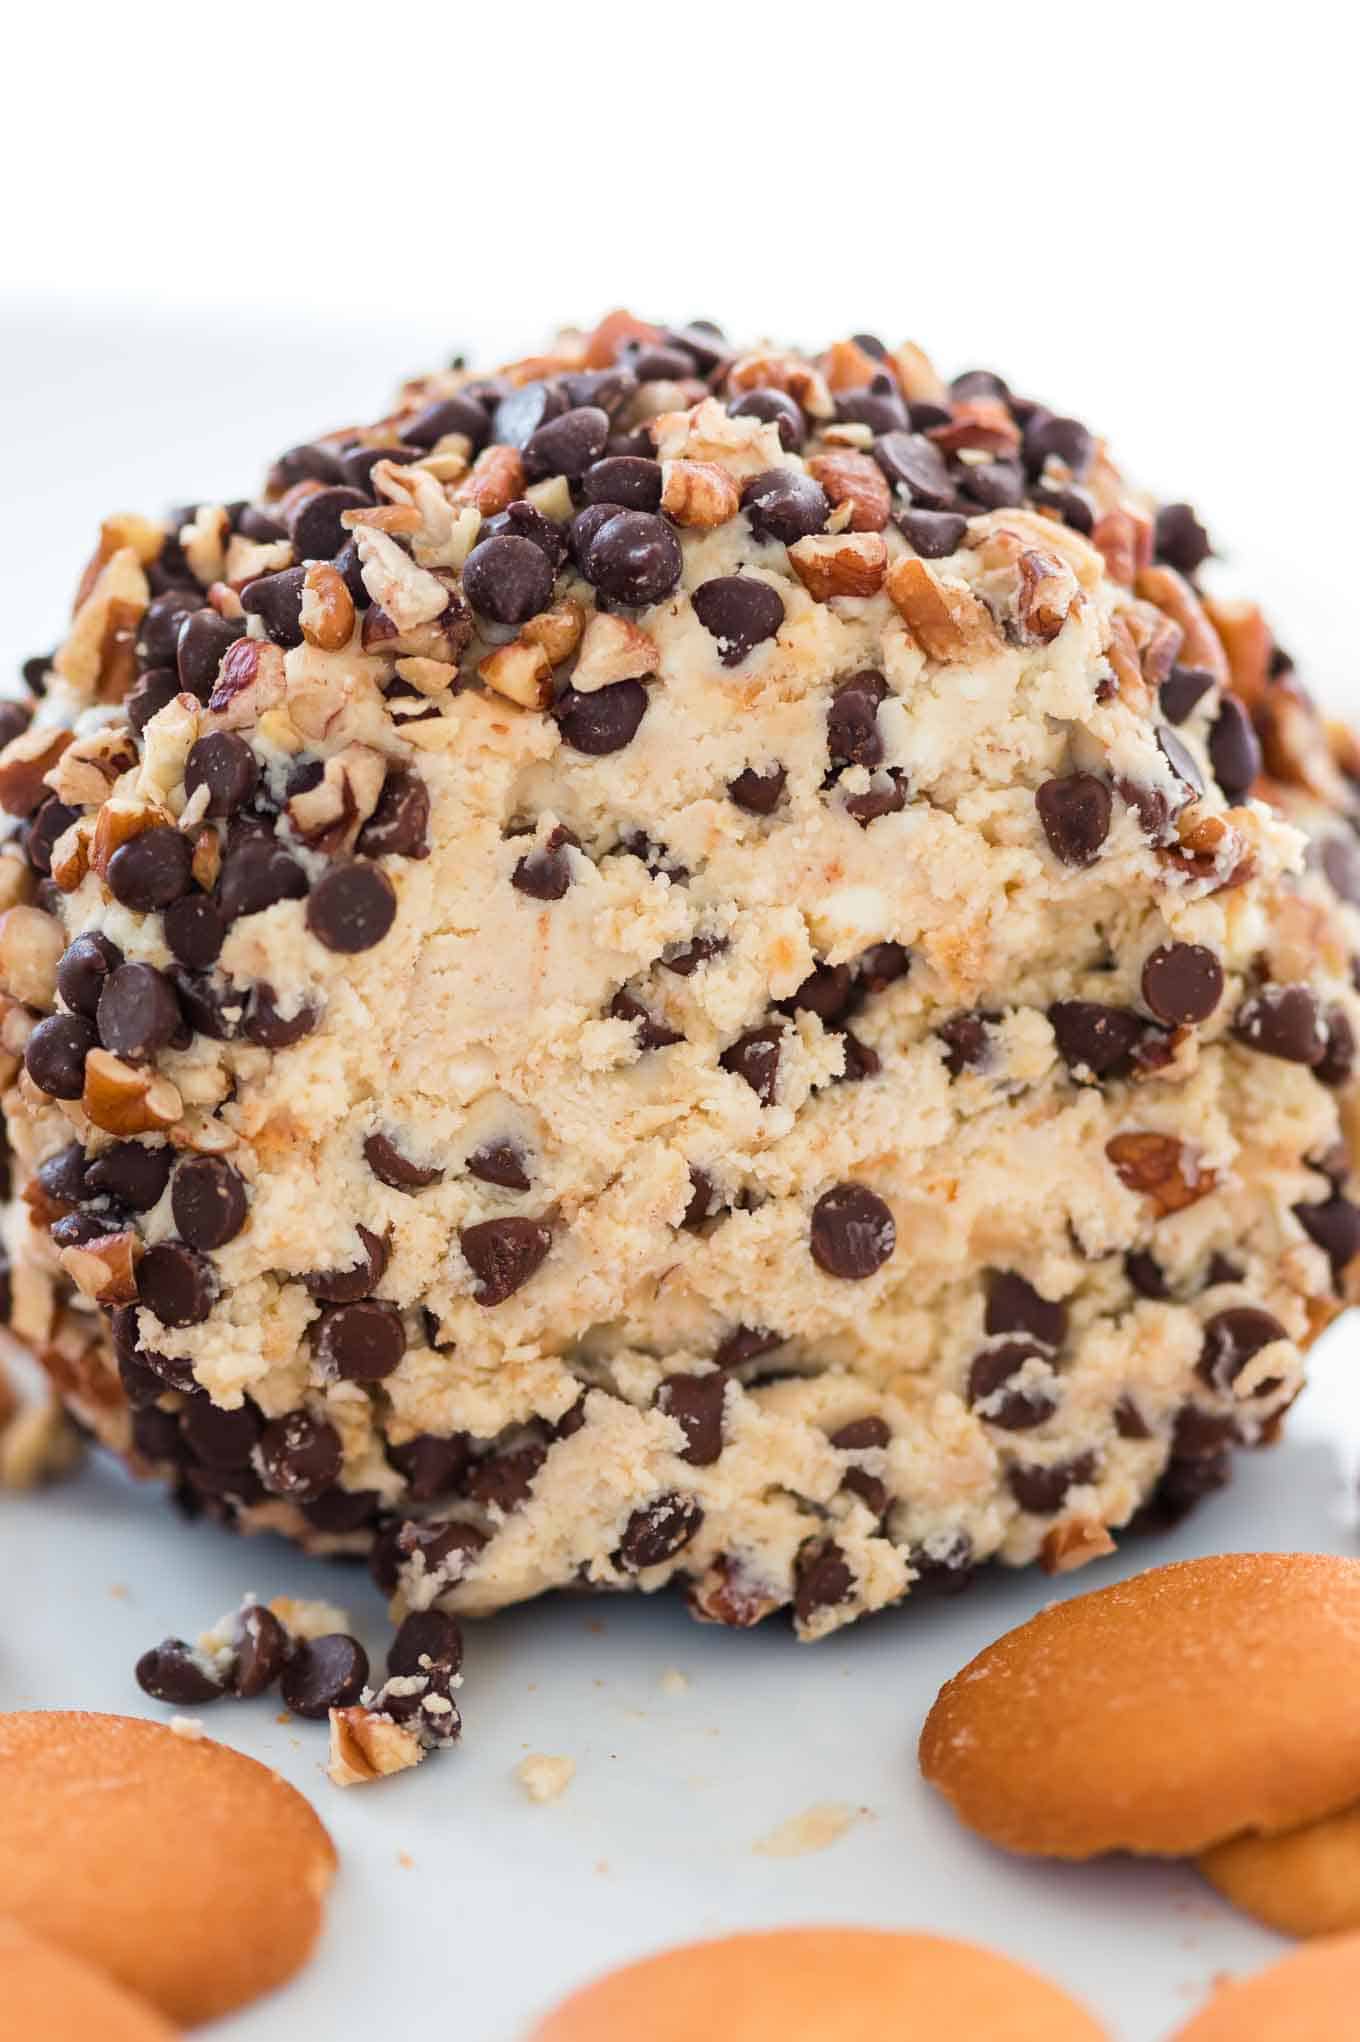 chocolate chip dessert cheese ball showing the inside